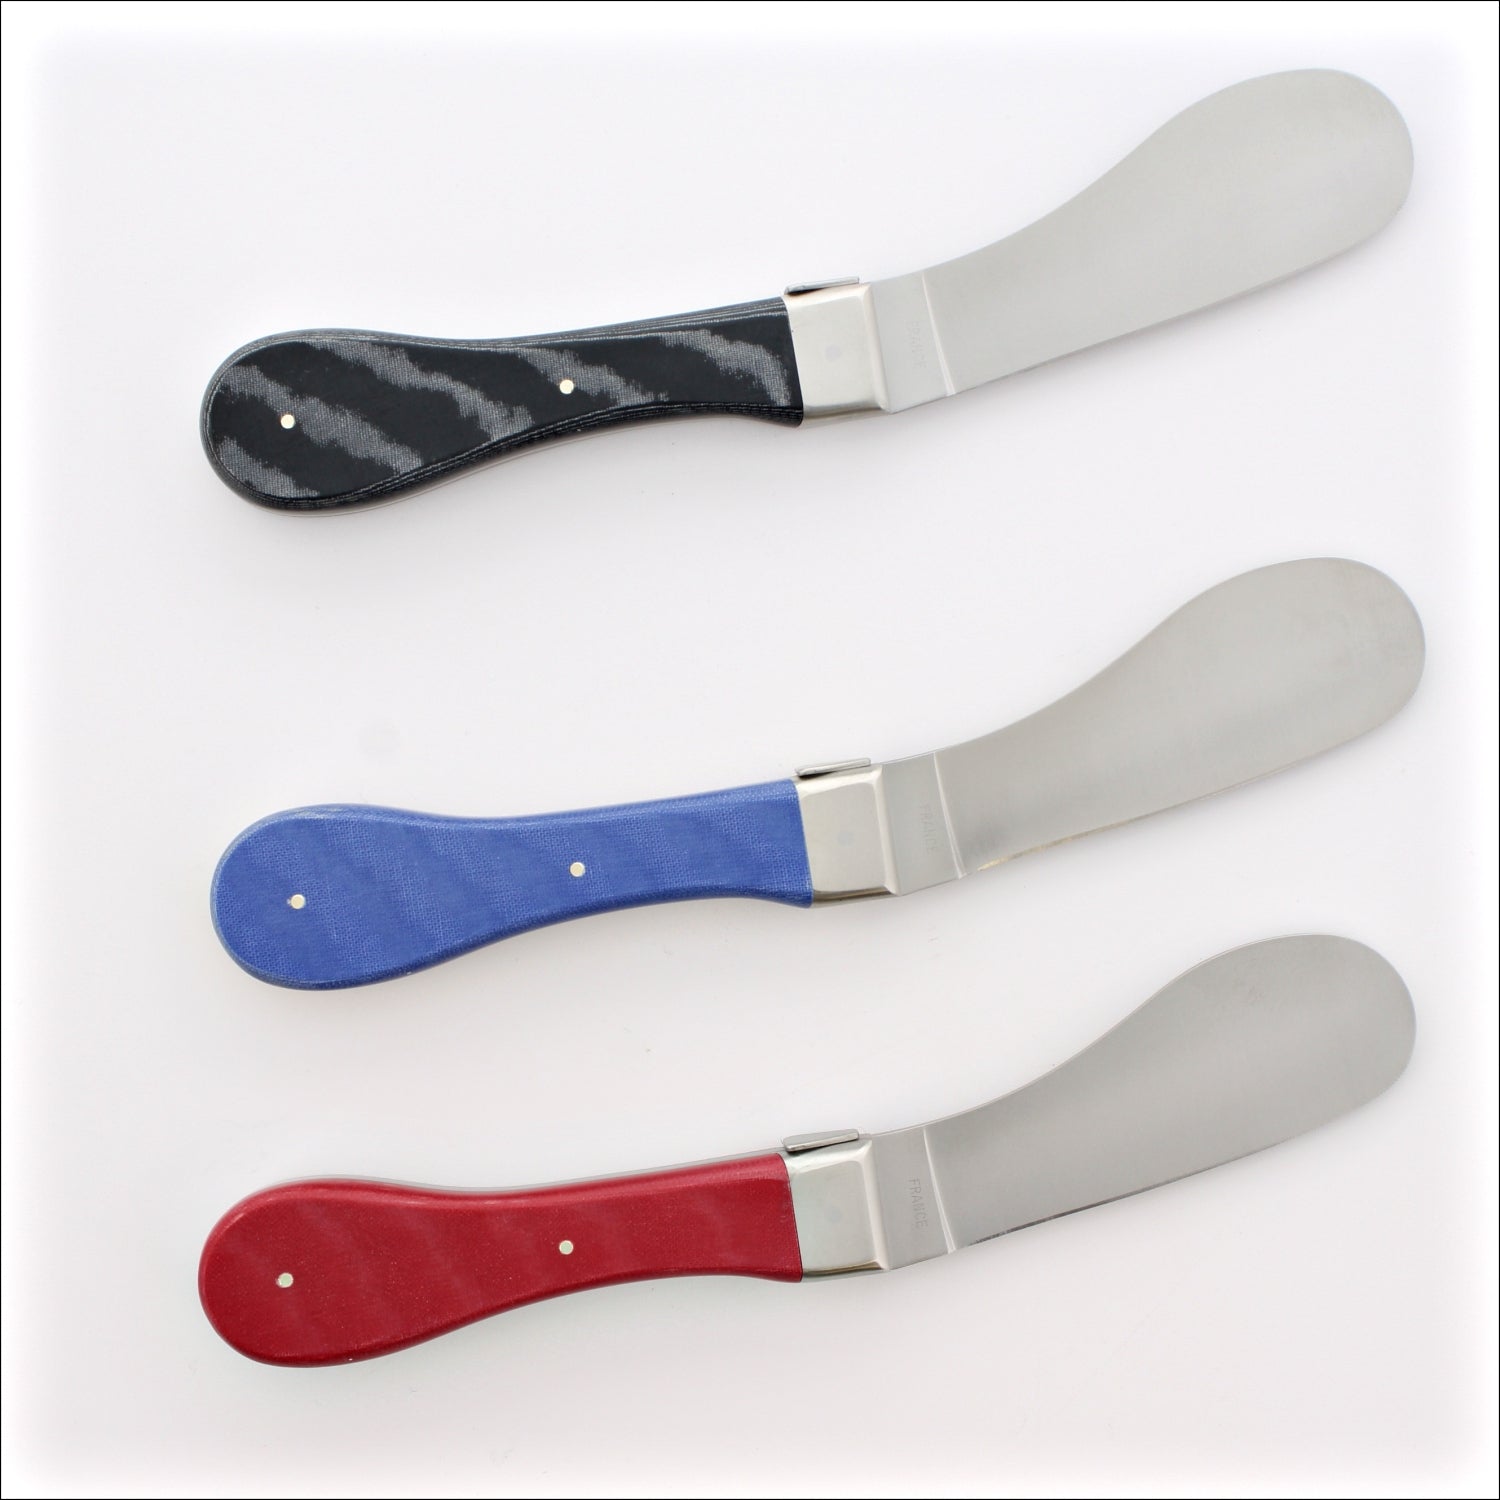 Forge de Laguiole Le Nomade" Cheese Knife